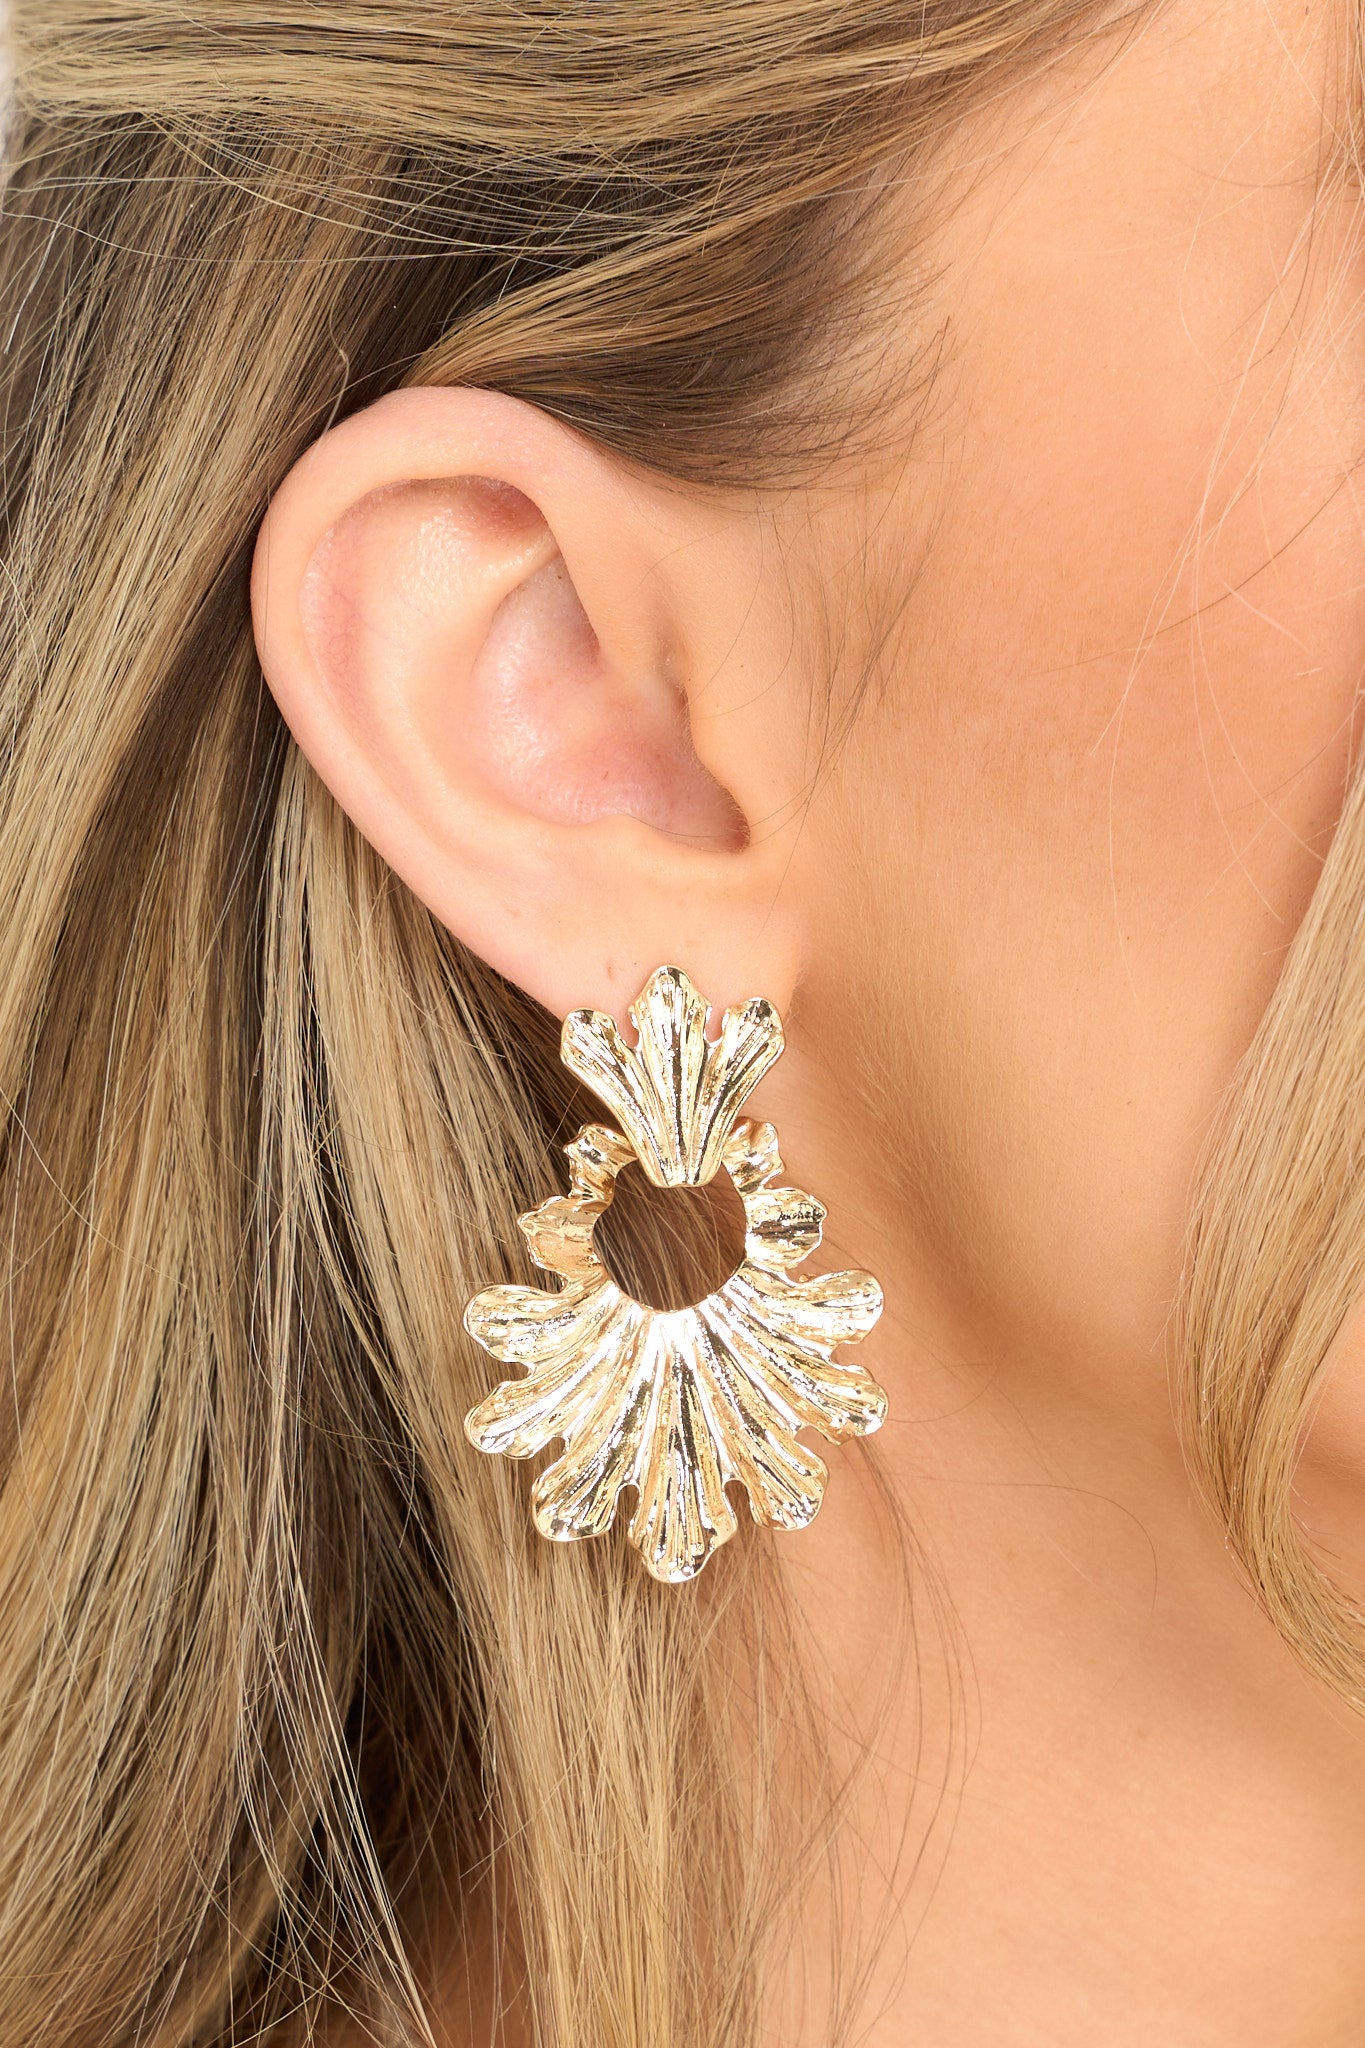 These gold earrings feature gold hardware, an extremely unique & intricate design, and secure post backings.